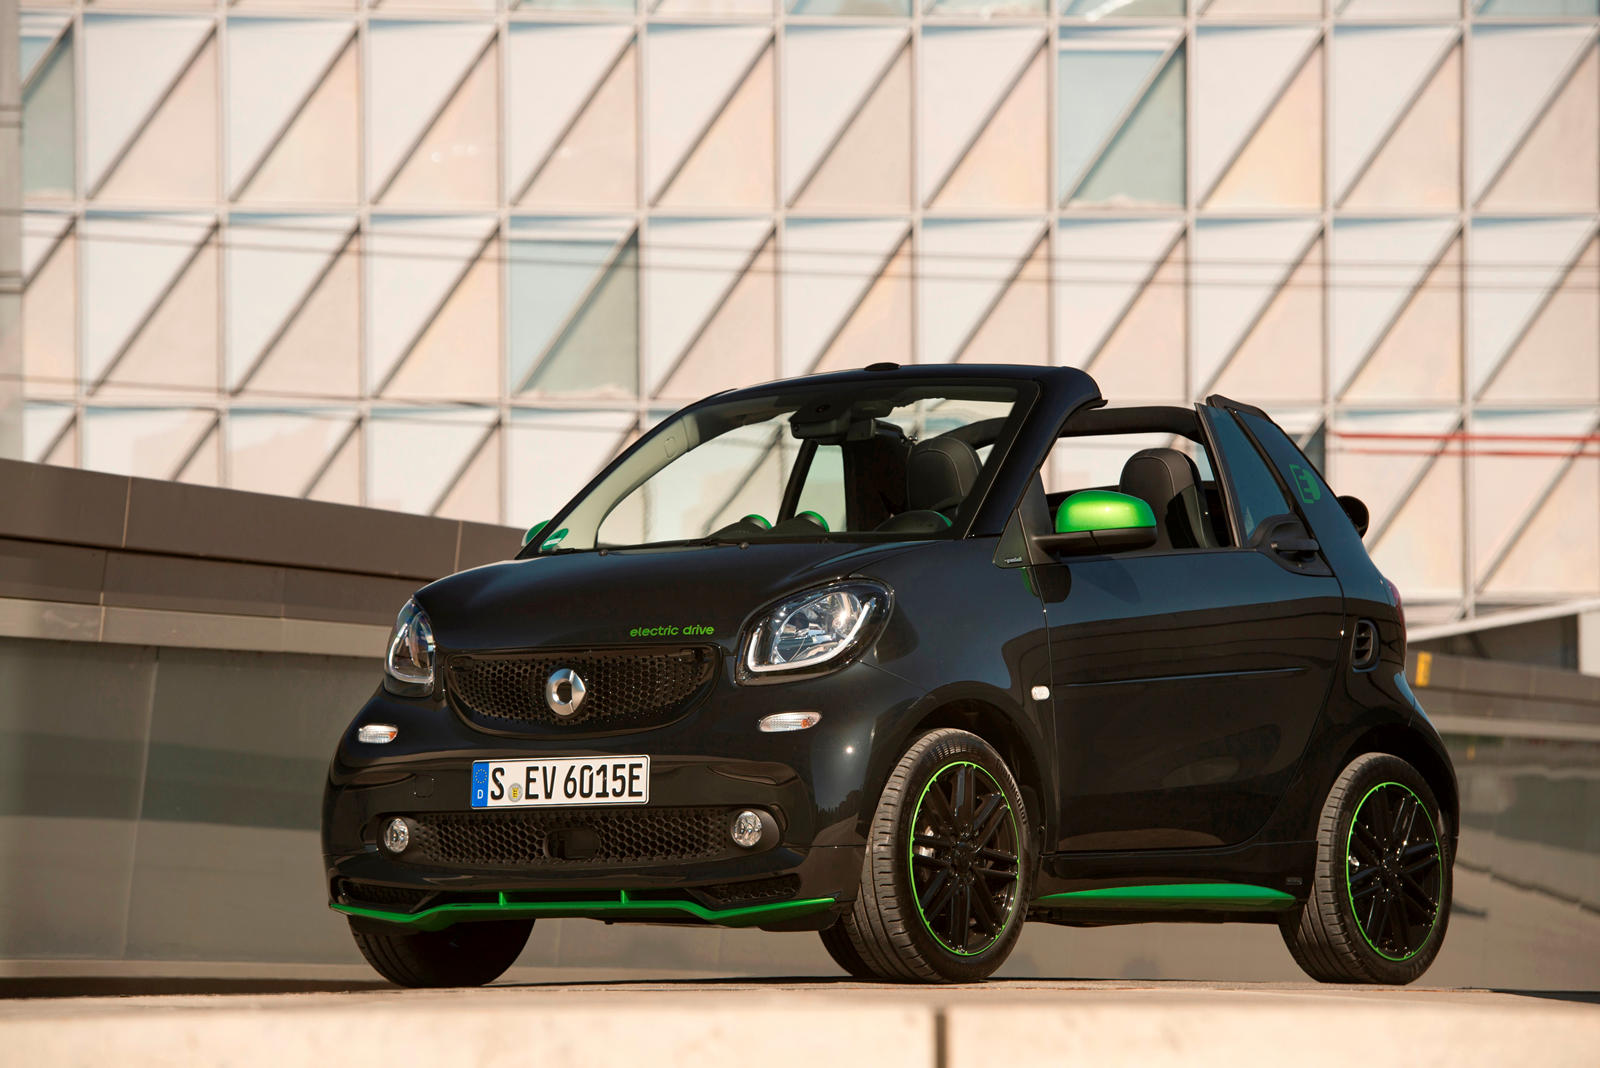 Smart Cars: Reviews, Pricing, and Specs